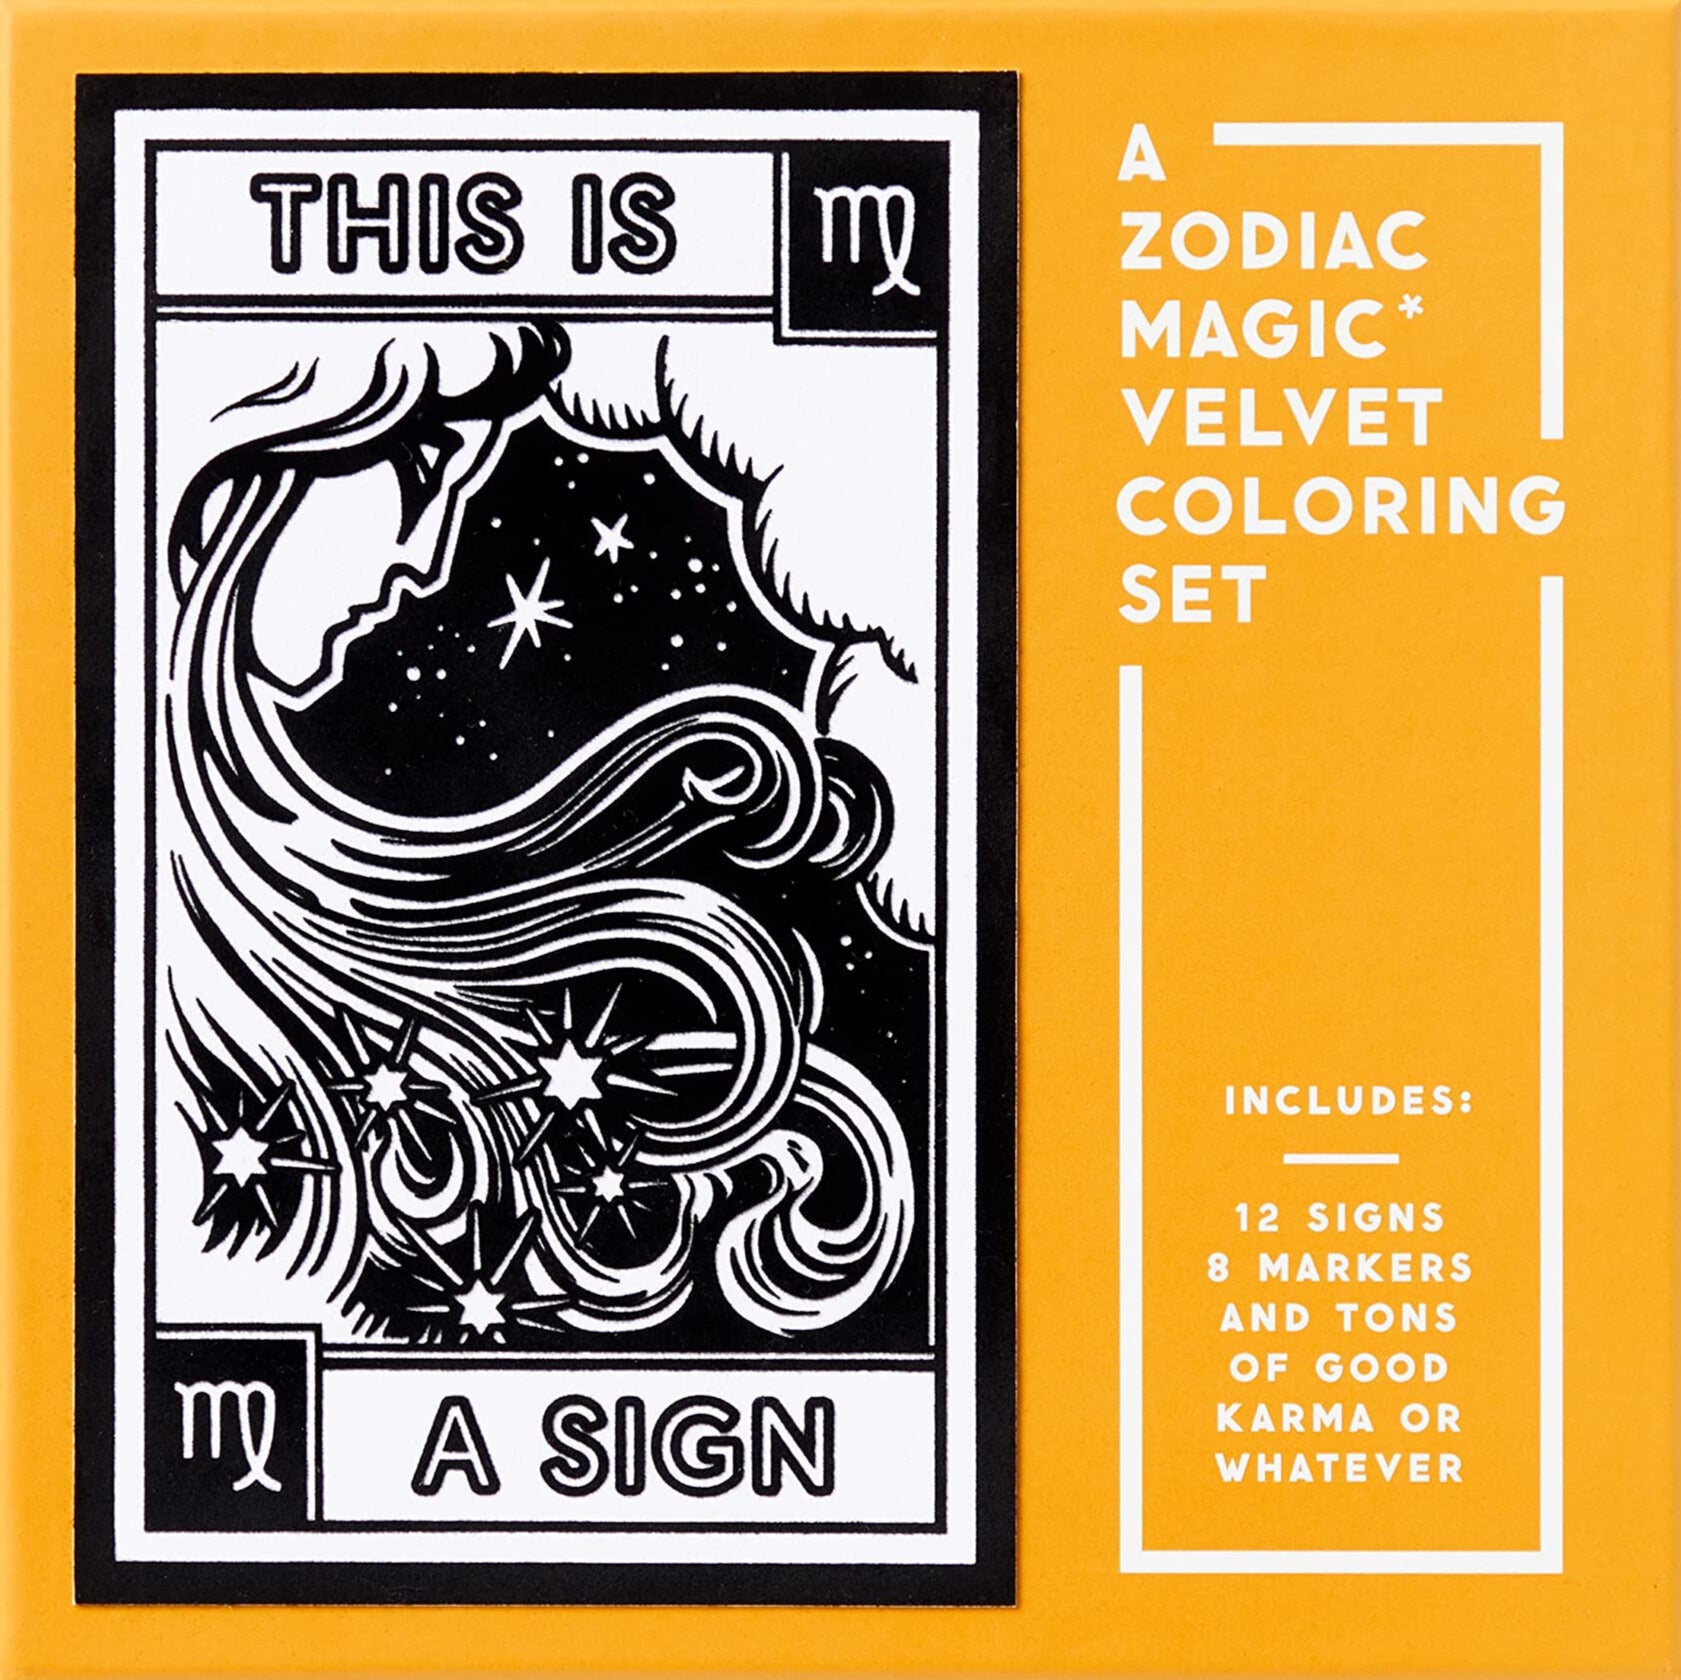 This Is A Sign - Magic velvet zodiac coloring set